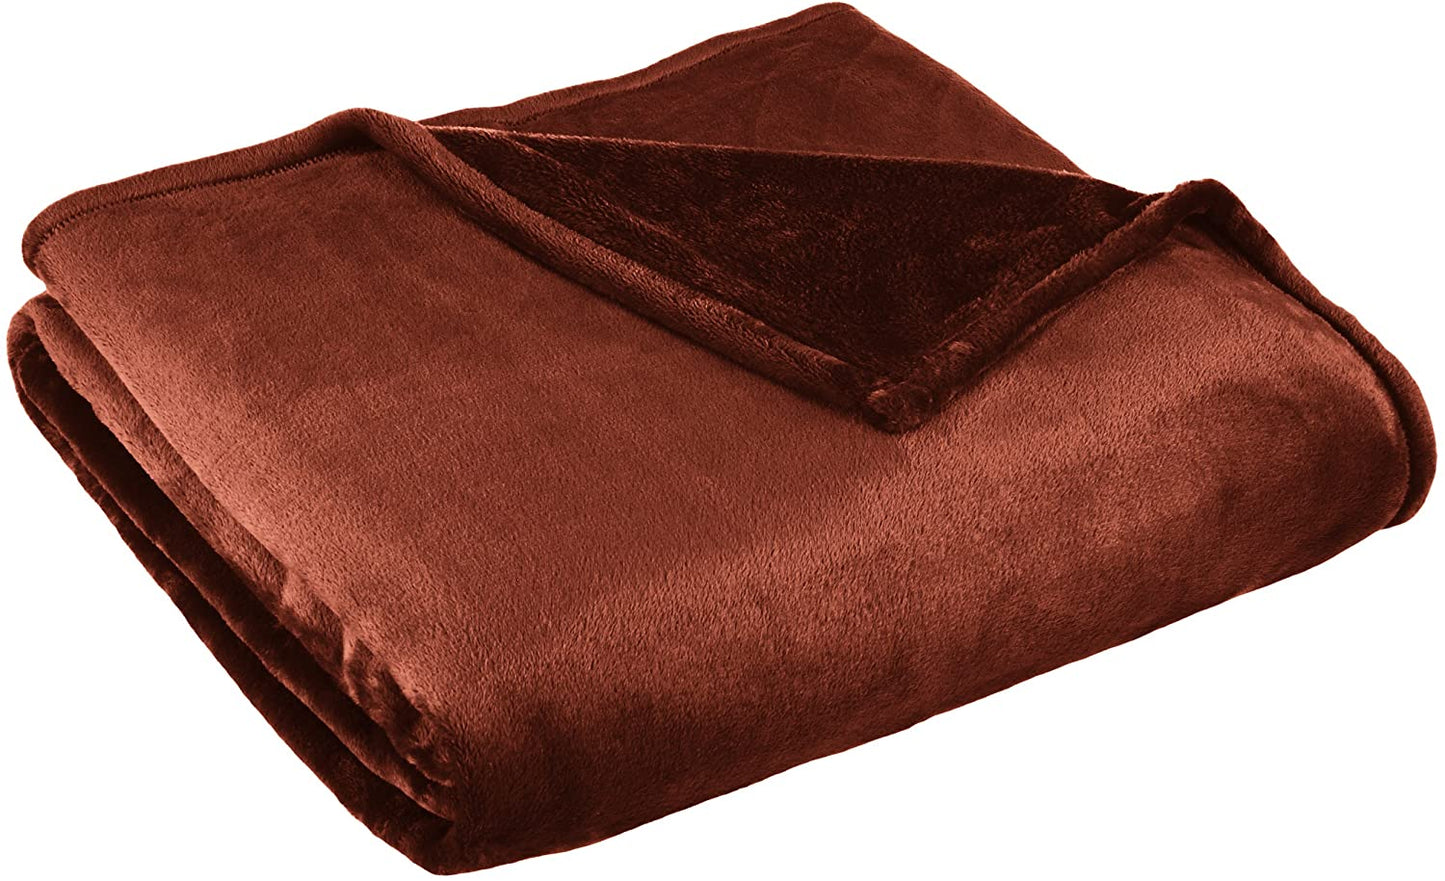 Thesis Cashmere Plush Blanket Full/Queen - Chocolate